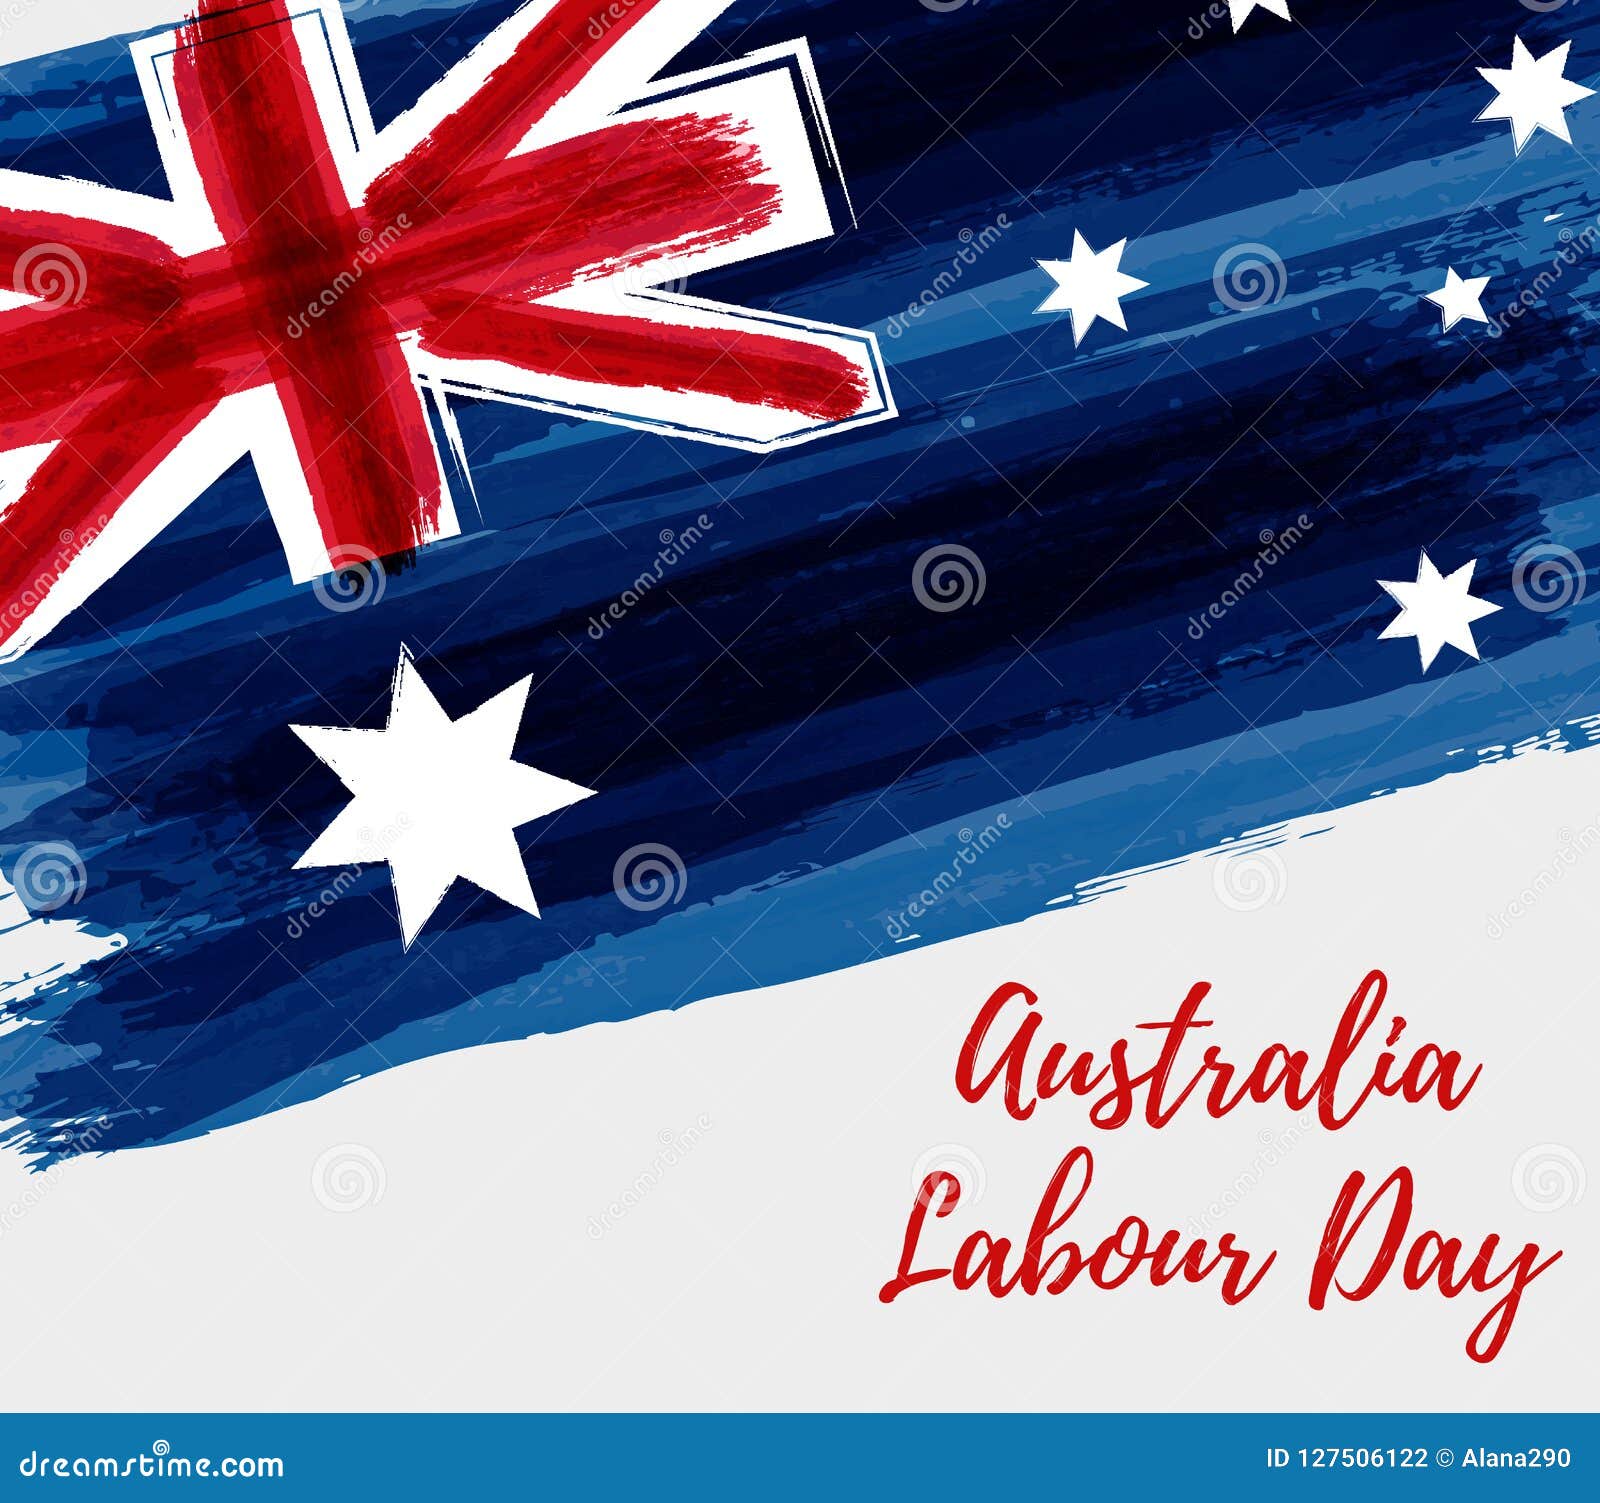 Australia Labour Day Holiday Background Stock Vector Illustration of